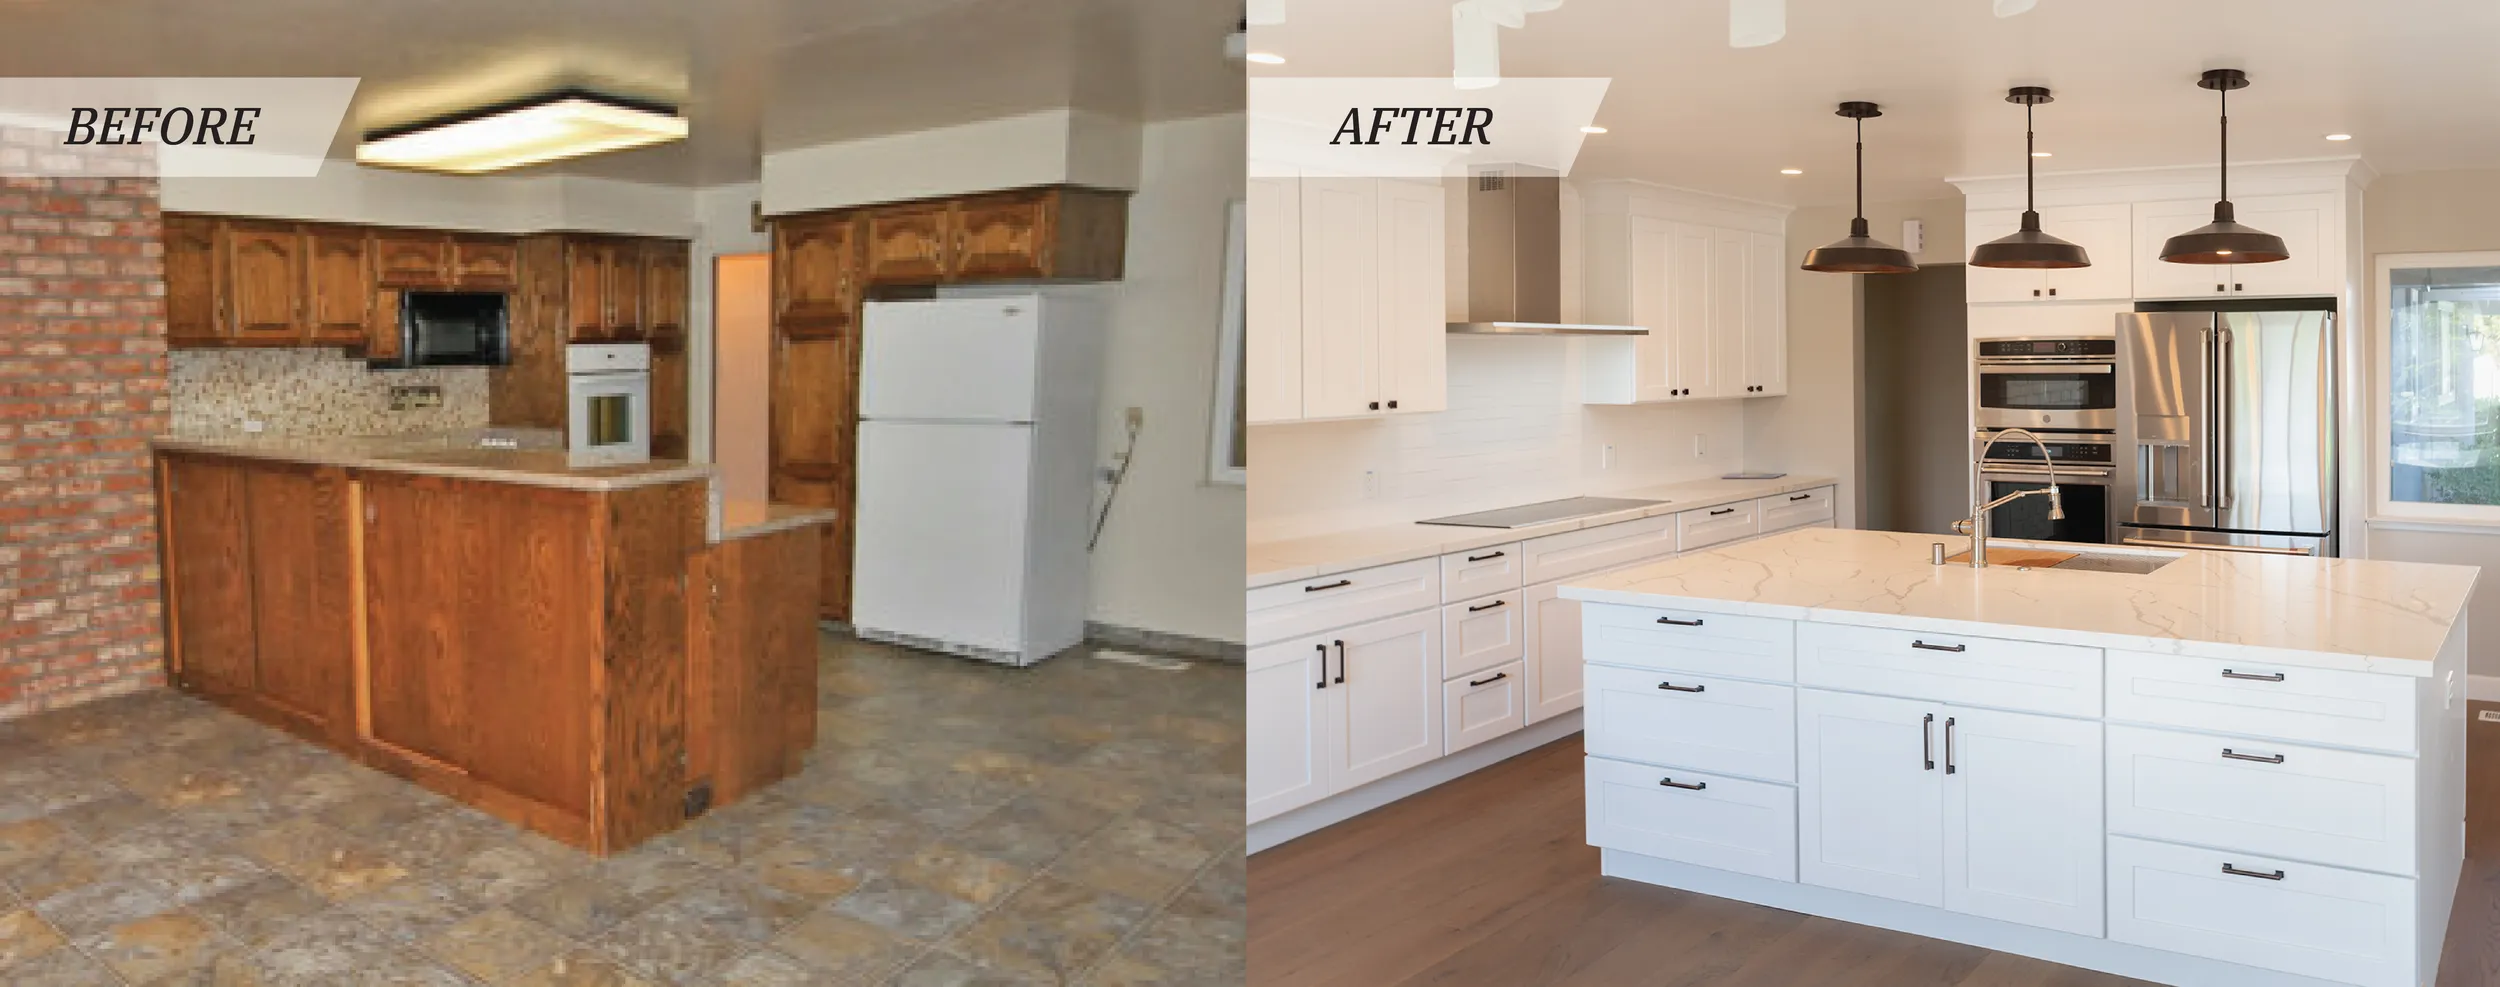 Before and after photos of a kitchen remodel project on Harwood Road in San Jose, CA